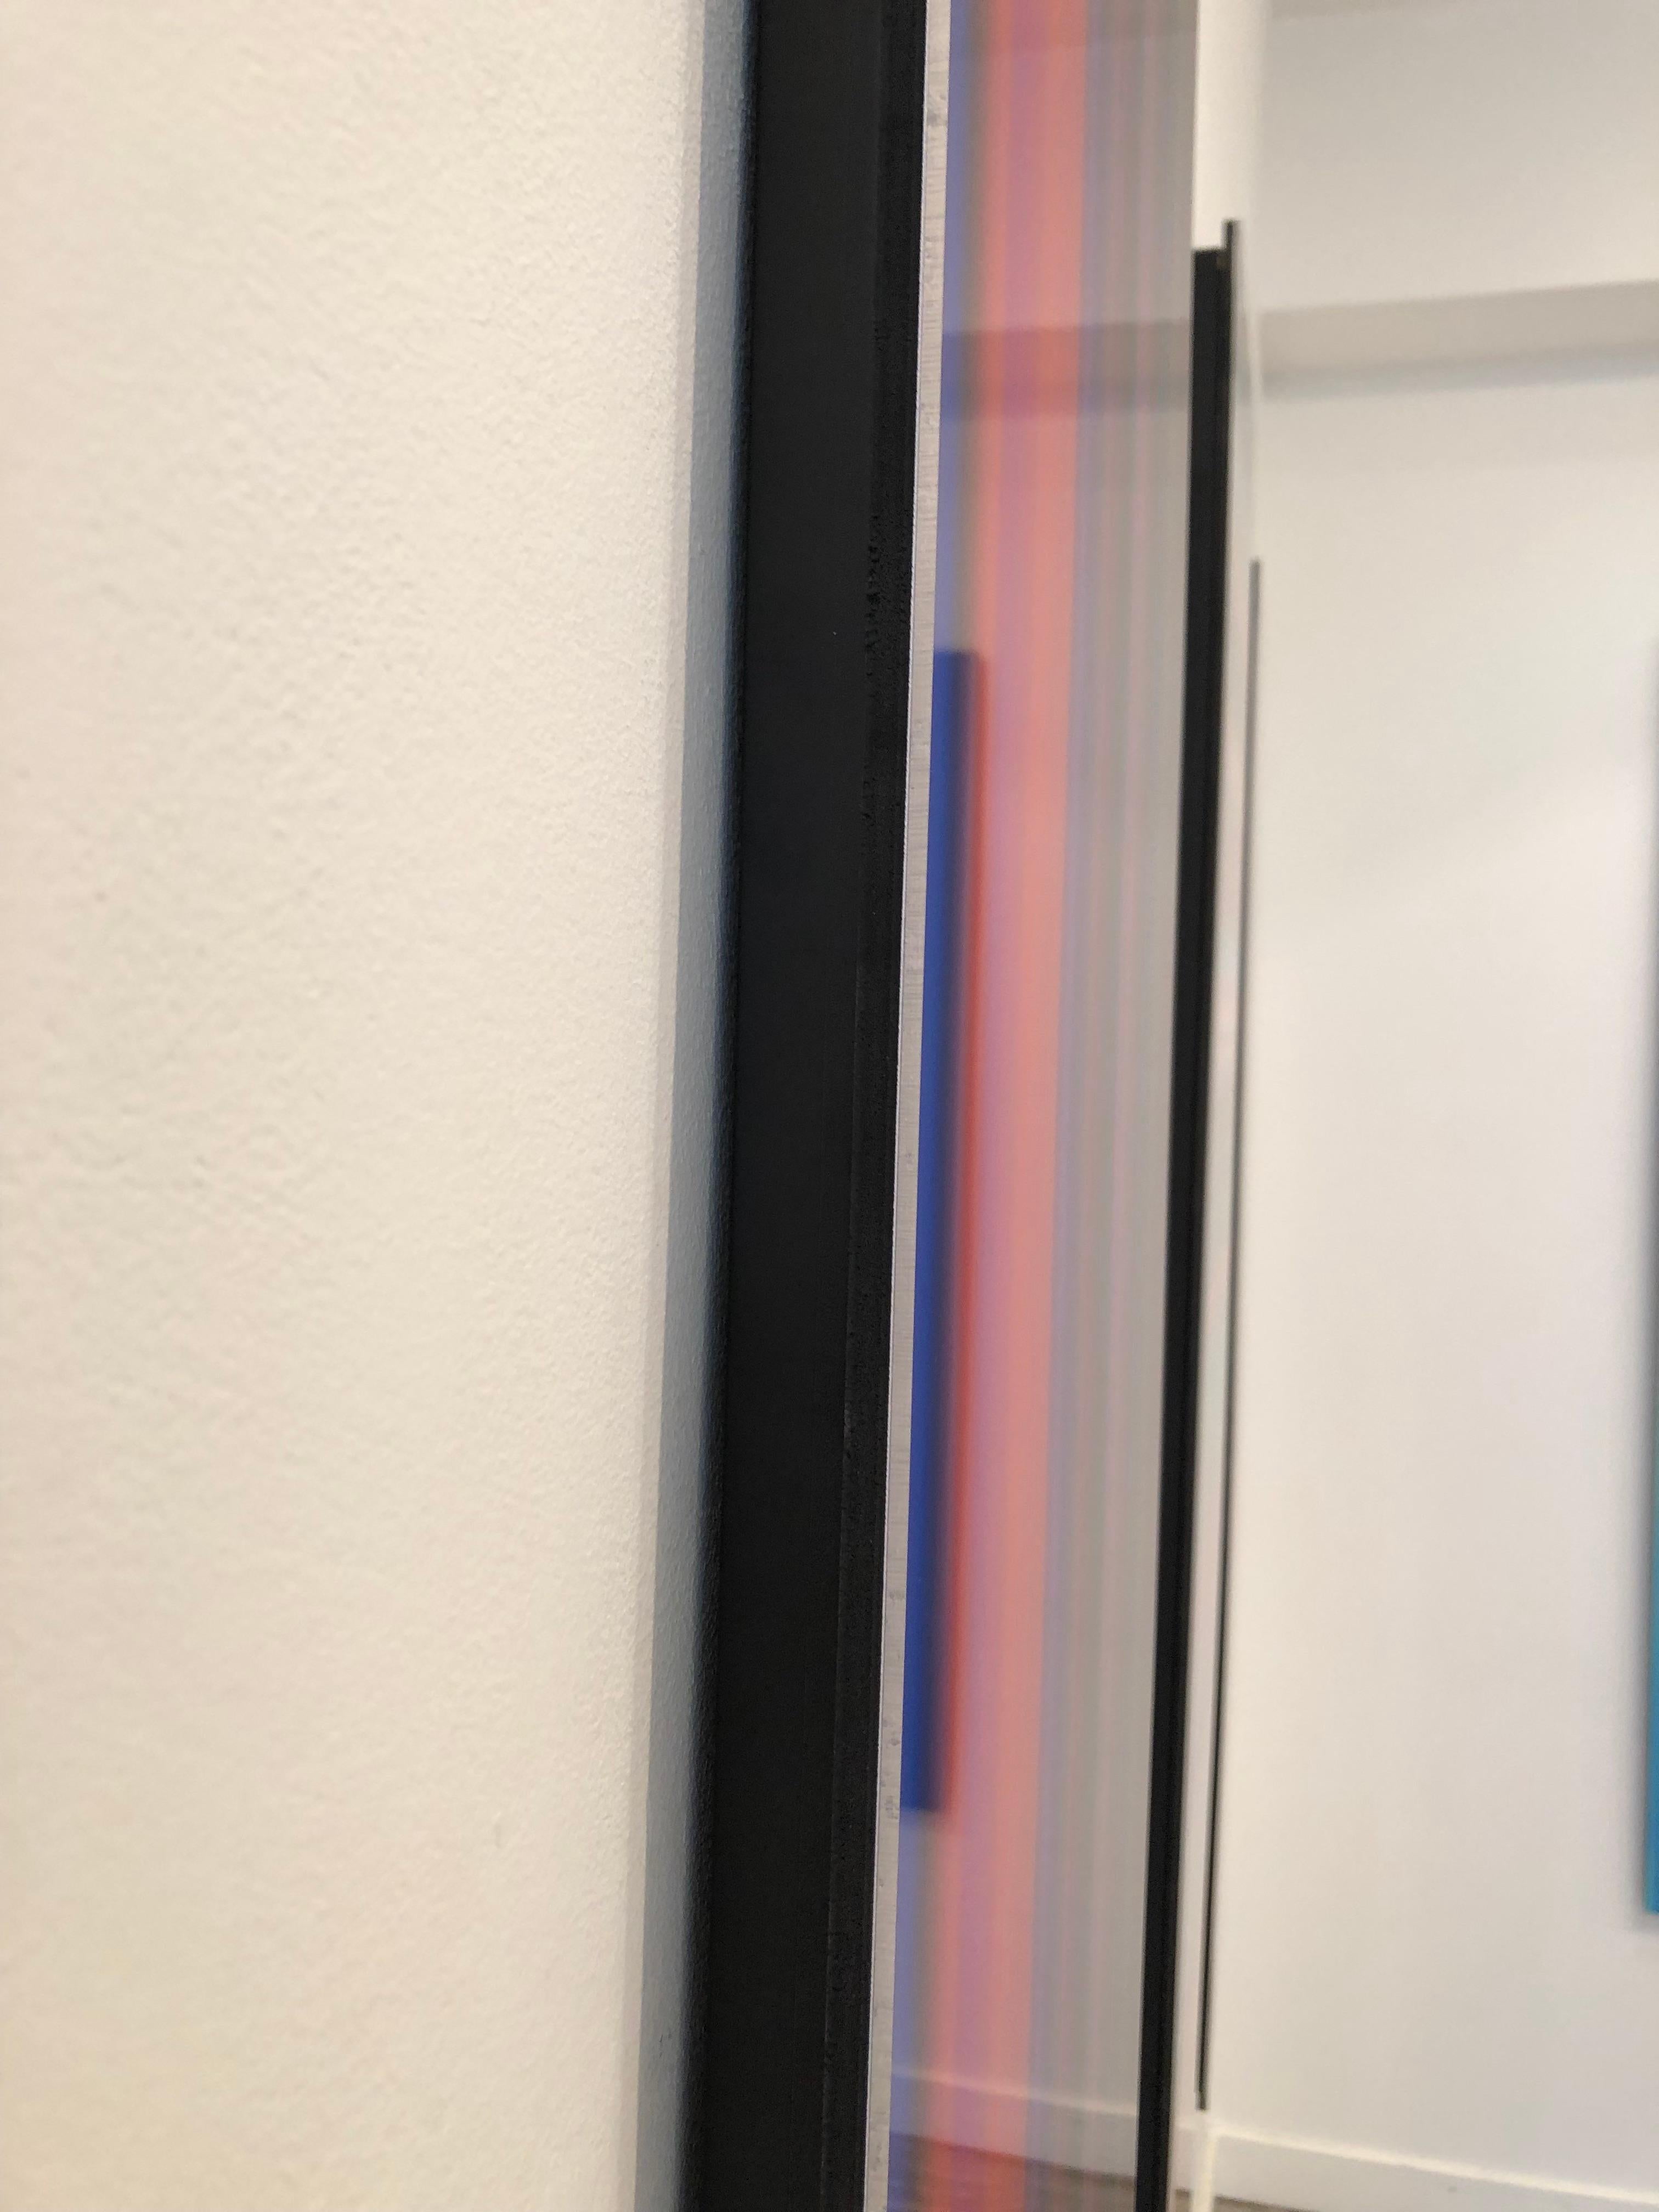 Colorful Words #1, #2 + #3 - Triptych - Glitch Art - Printed on Acrylic - Photograph by Oz Van Rosen